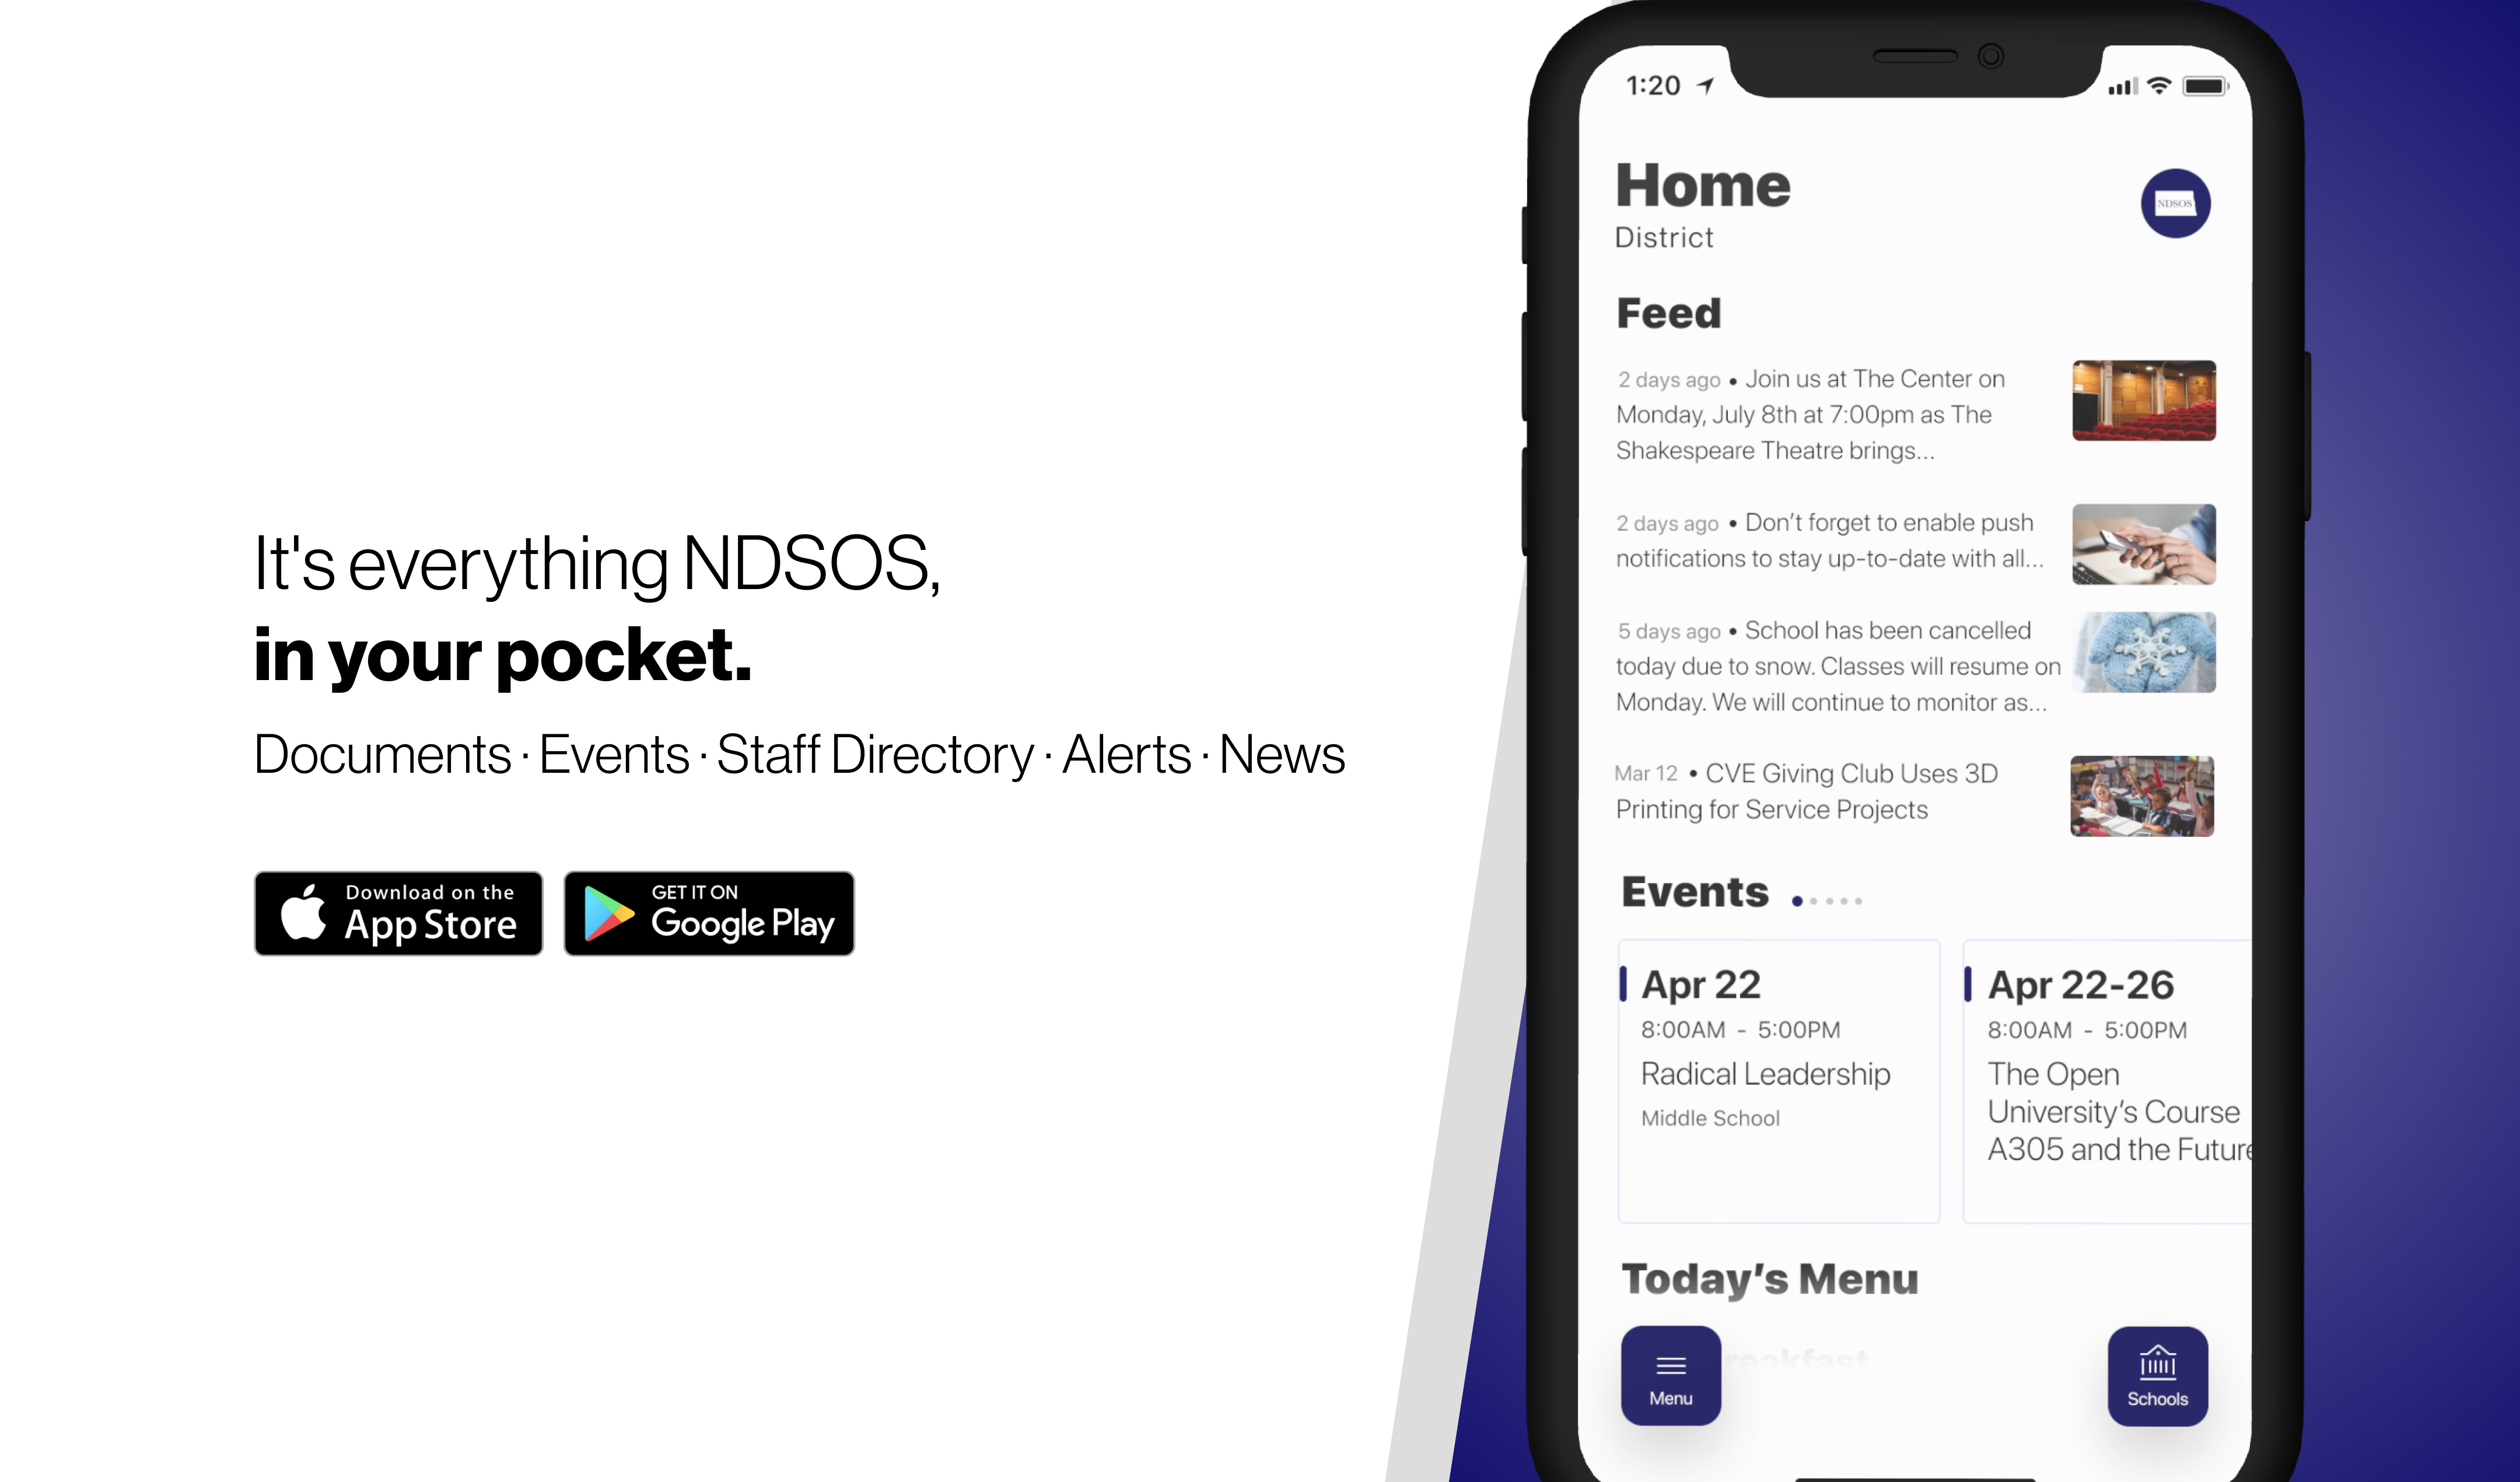 NDSOS app: its everything NDSOS, in your pocket. 